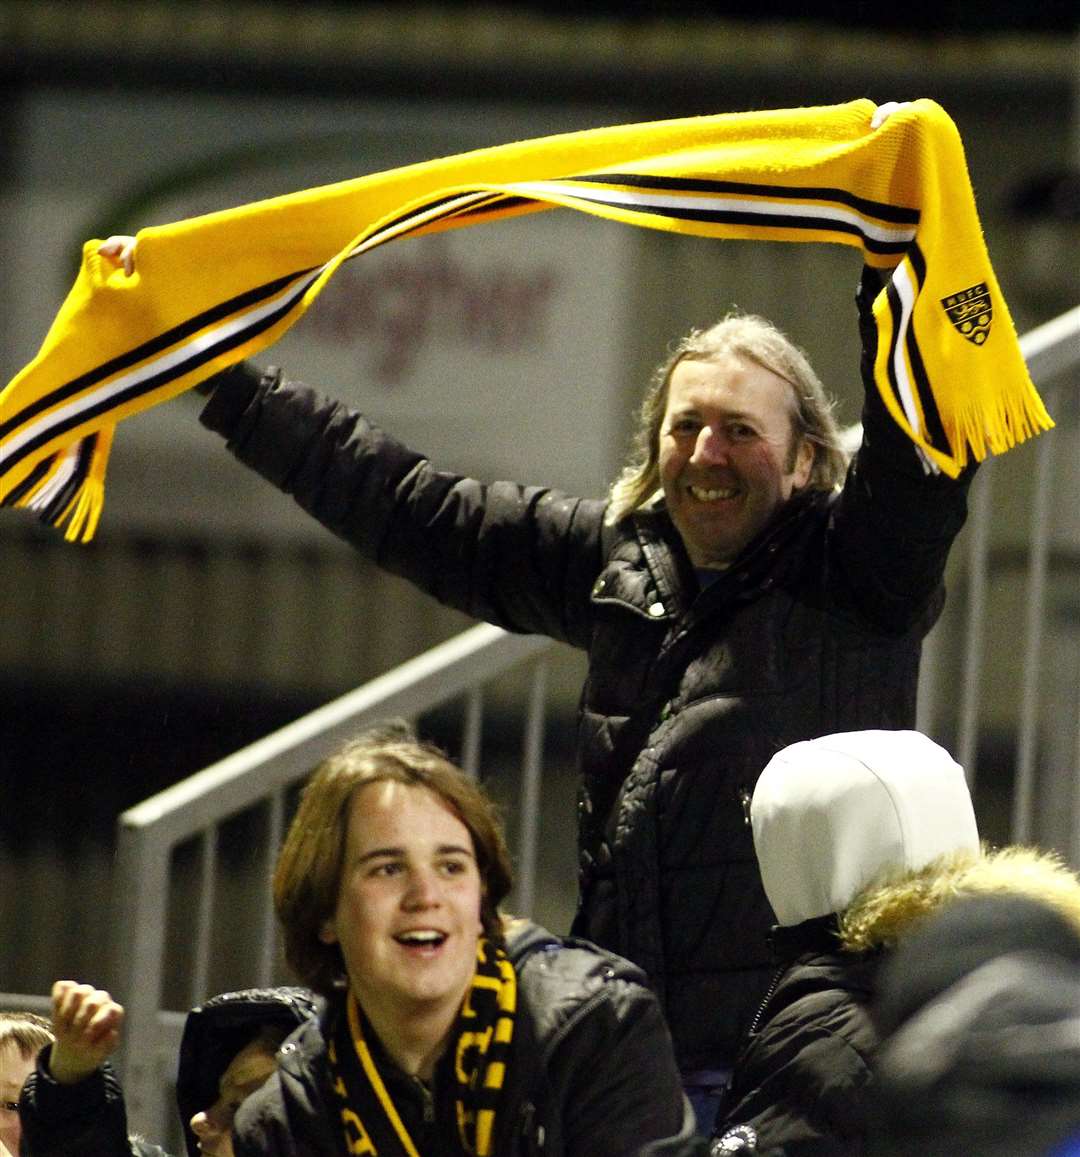 The good times are back at Maidstone as fans celebrate the FA Cup win over Torquay Picture: Sean Aidan